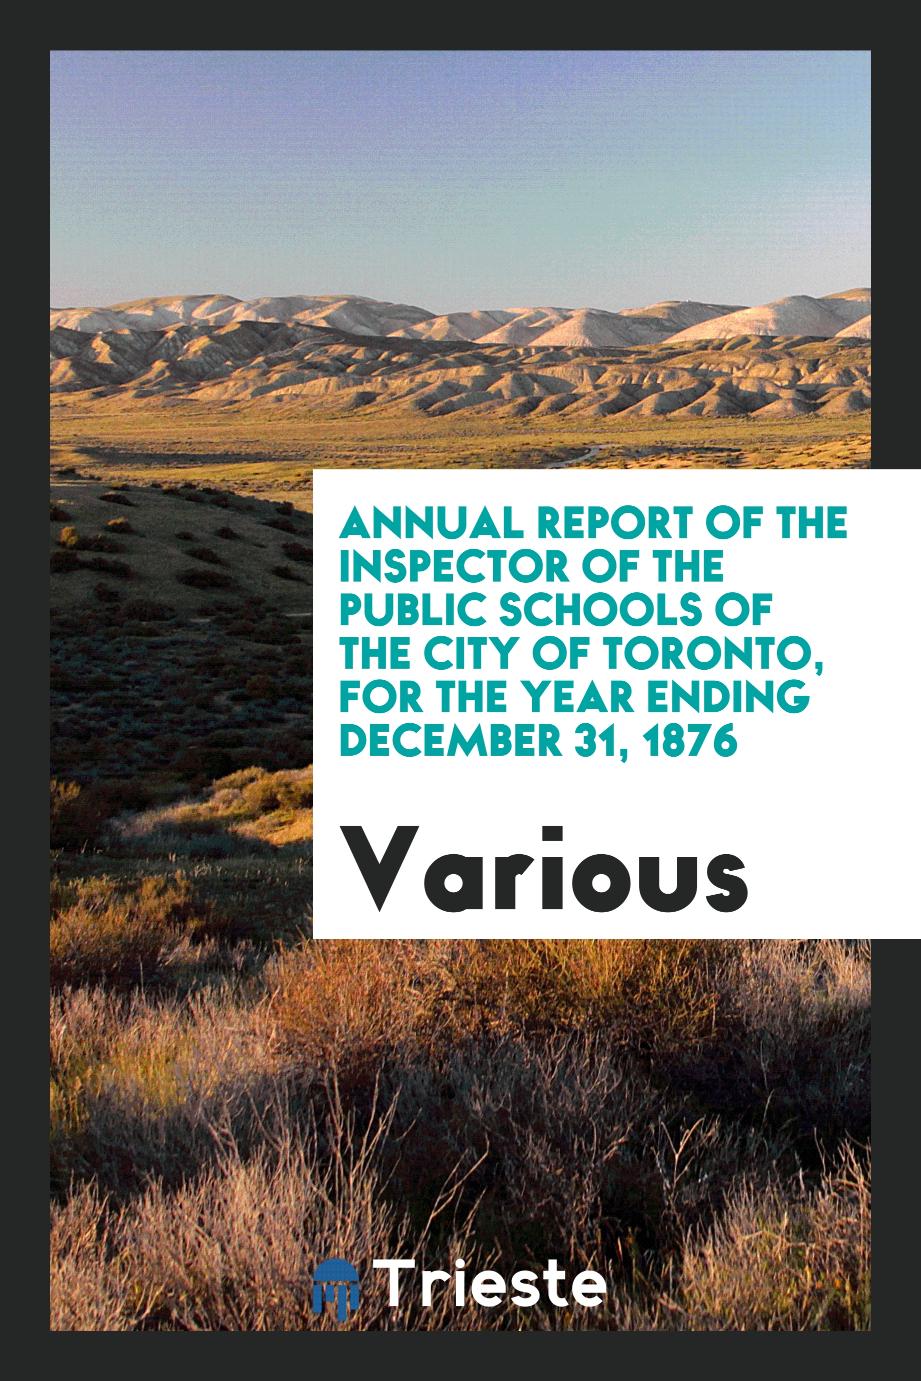 Annual report of the inspector of the public schools of the city of toronto, for the year ending december 31, 1876